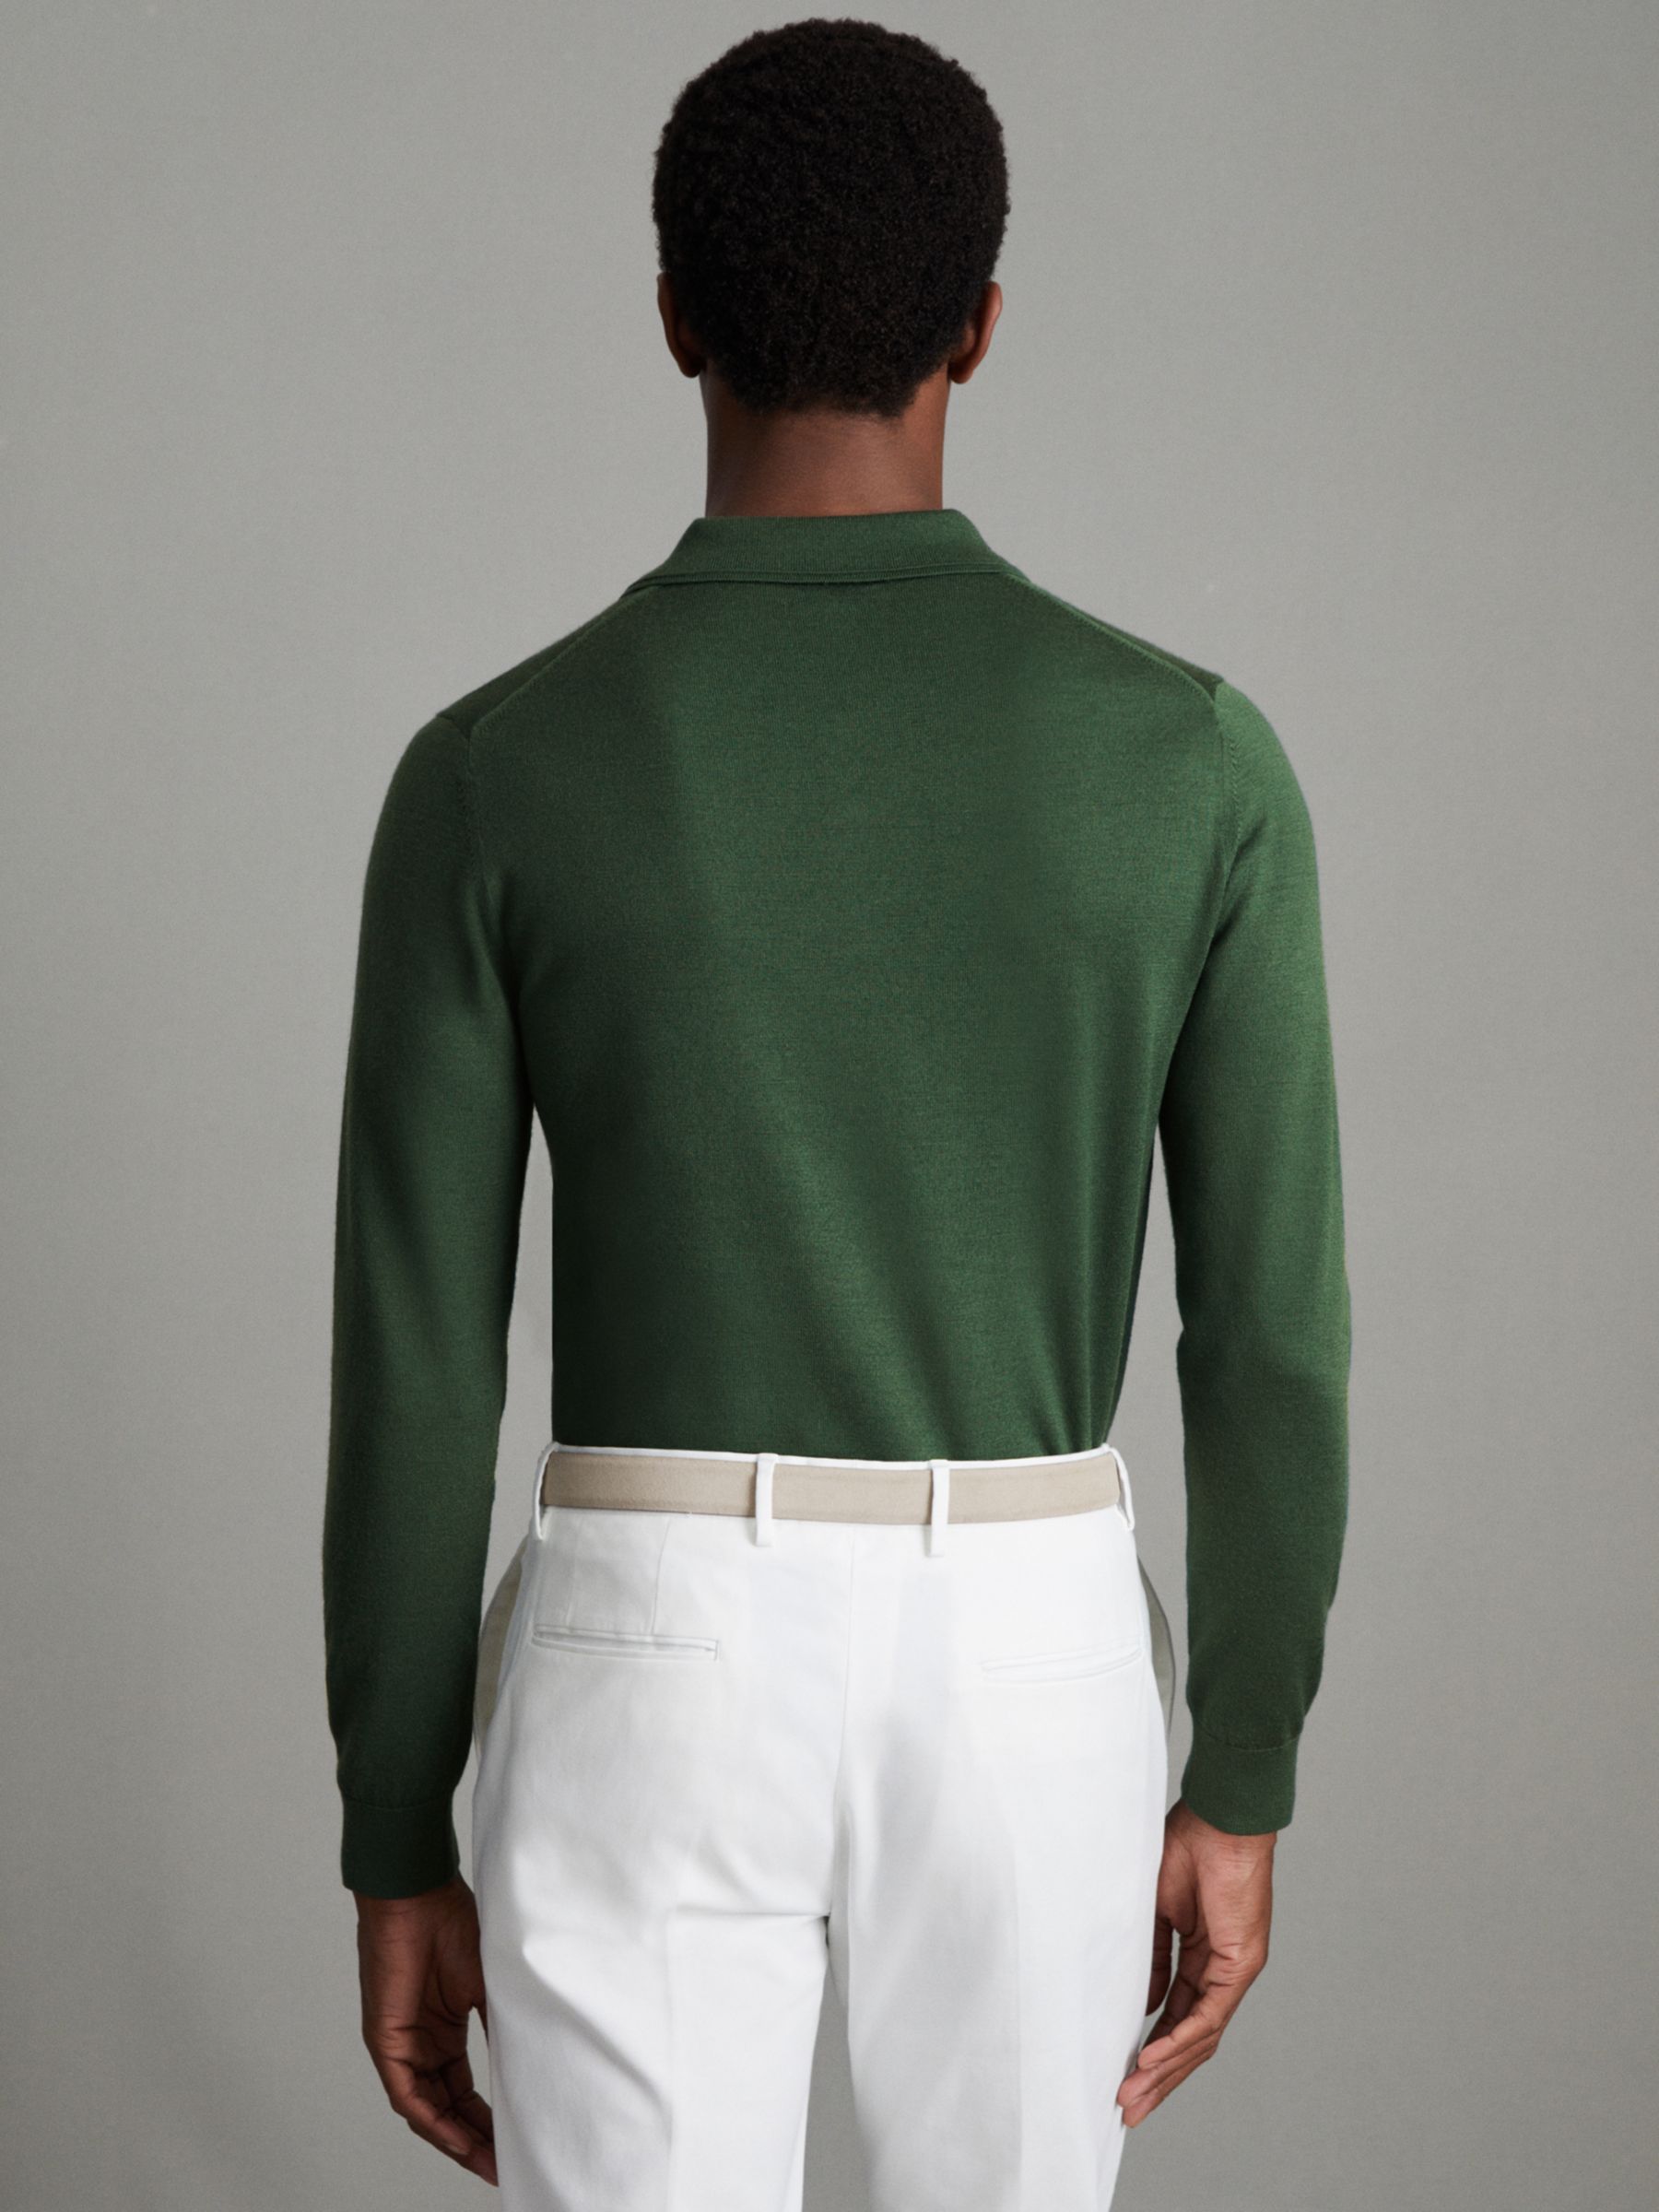 Reiss Trafford Knitted Wool Long Sleeve Polo Top, Hunting Green, XS